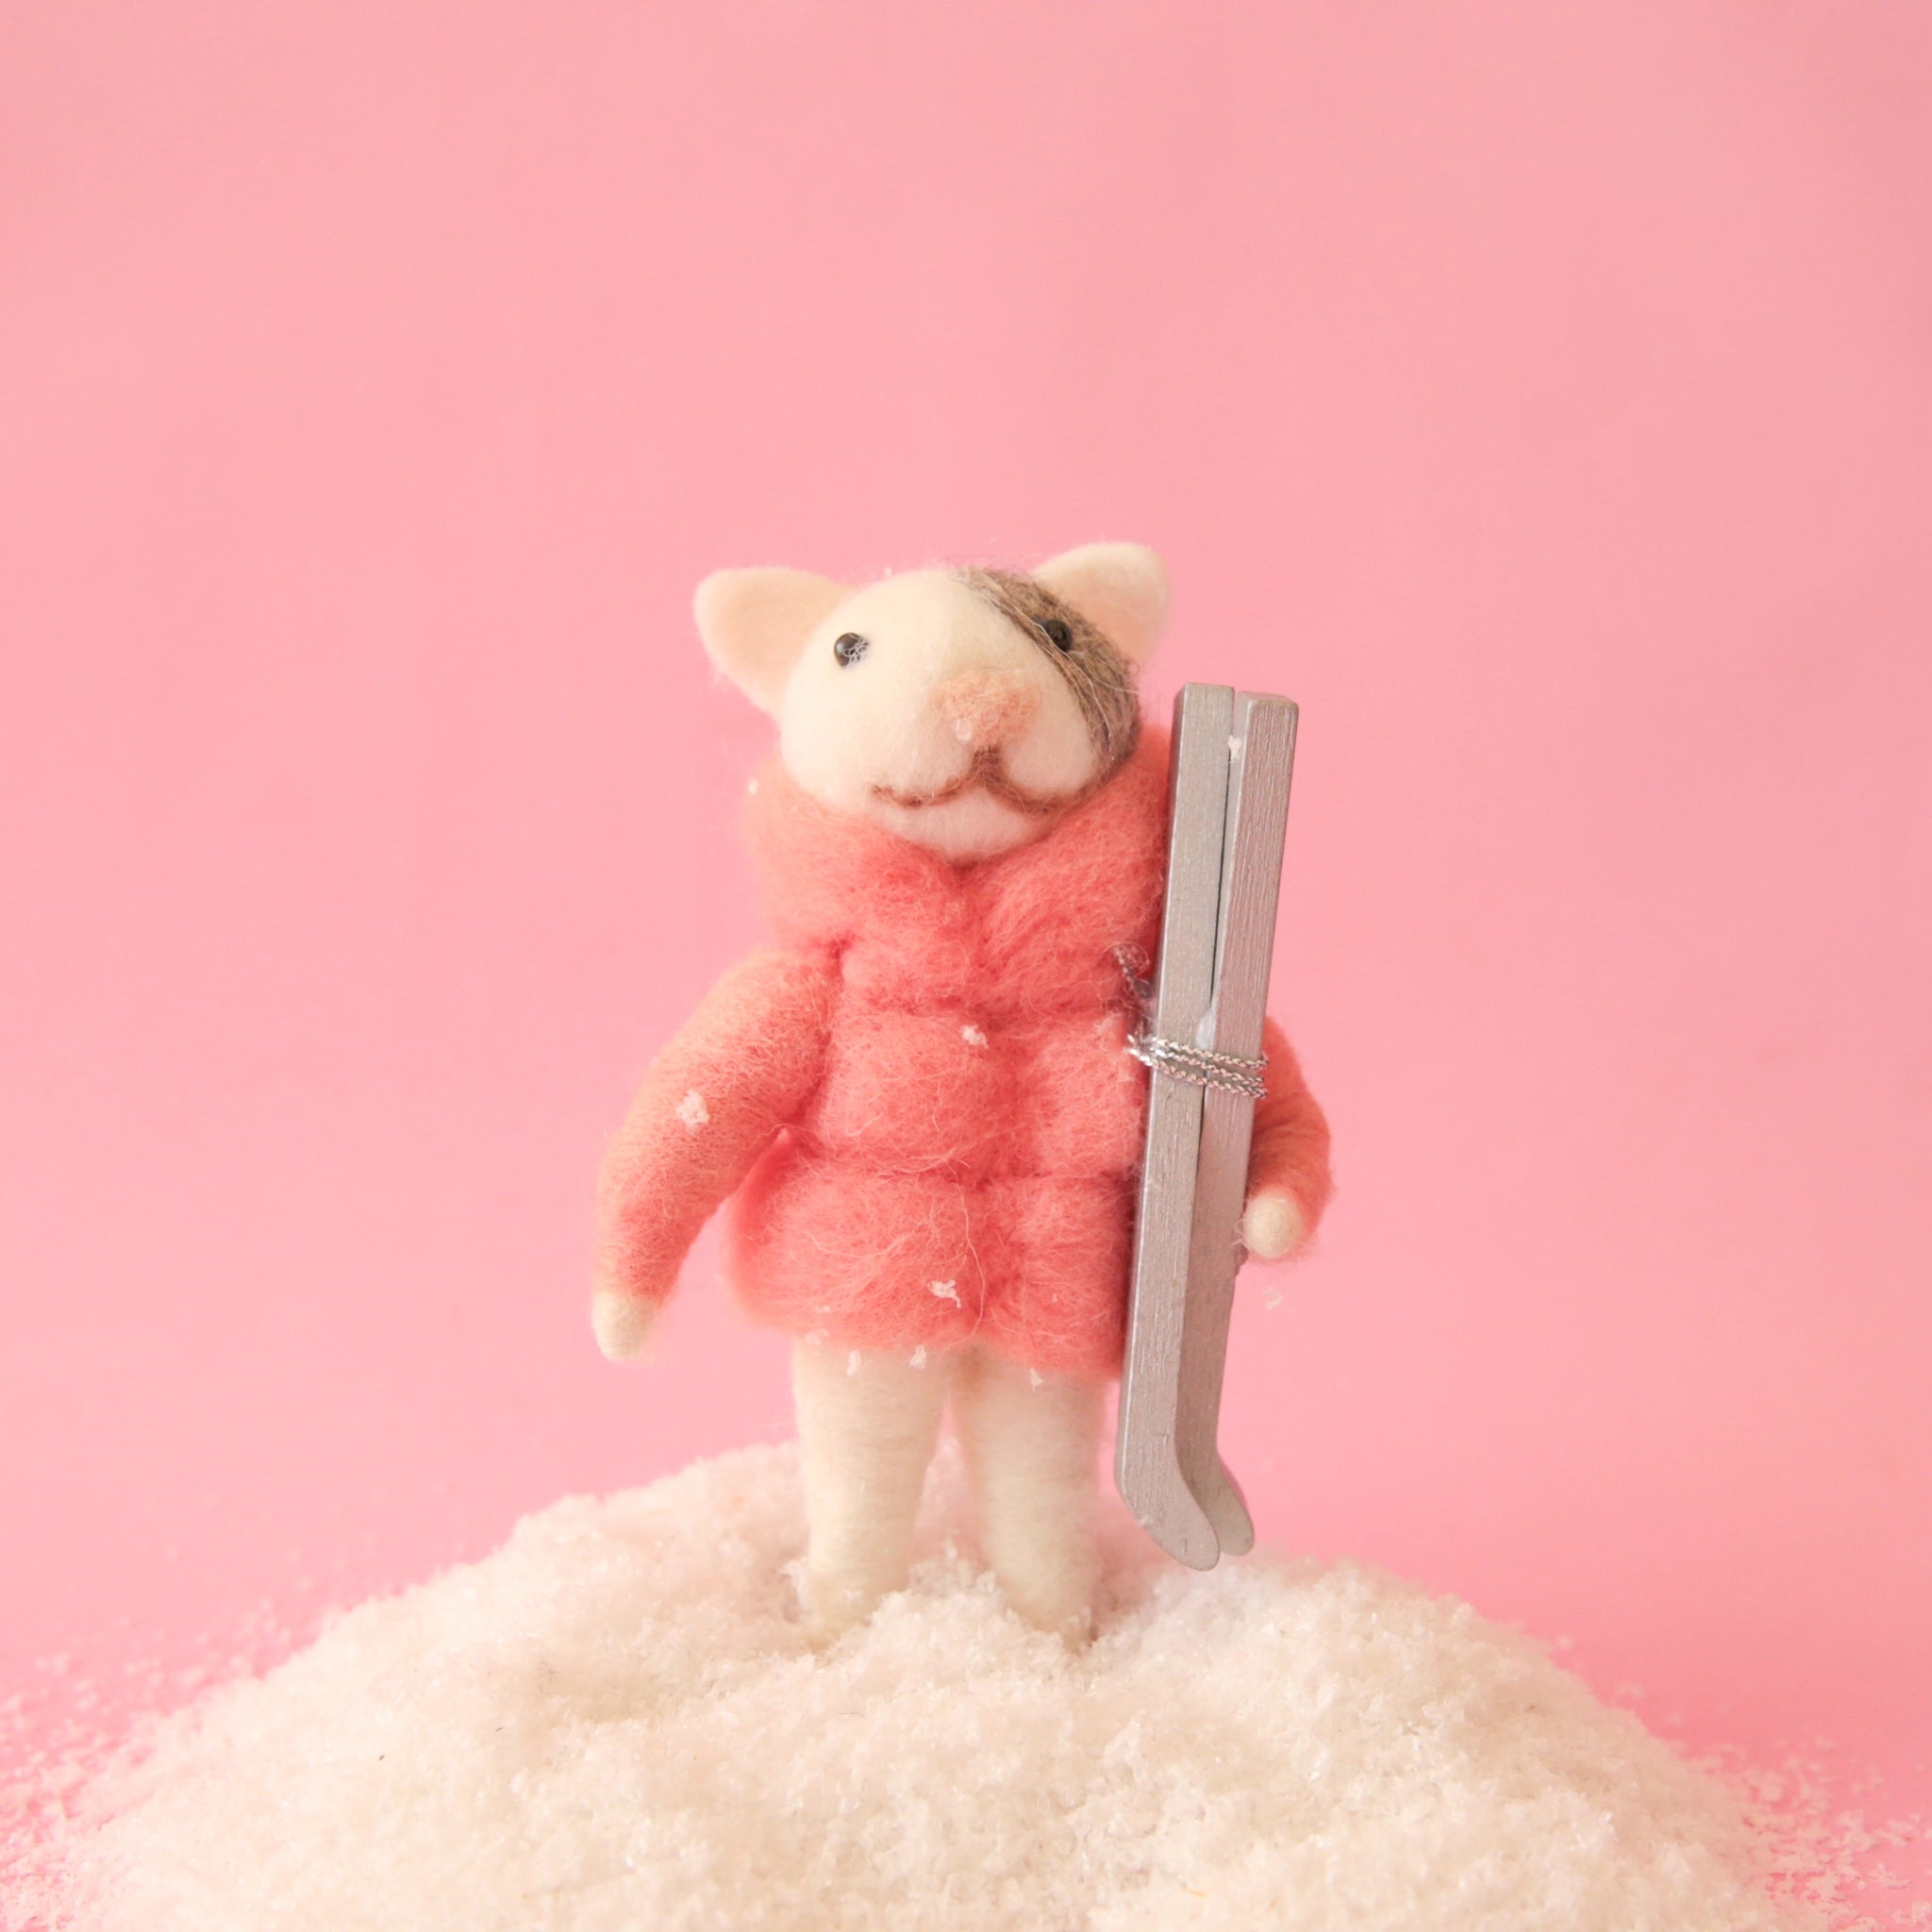 On a pink background is a white and grey felt cat ornament wearing a pink puffy jacket and holding a pair of silver skis